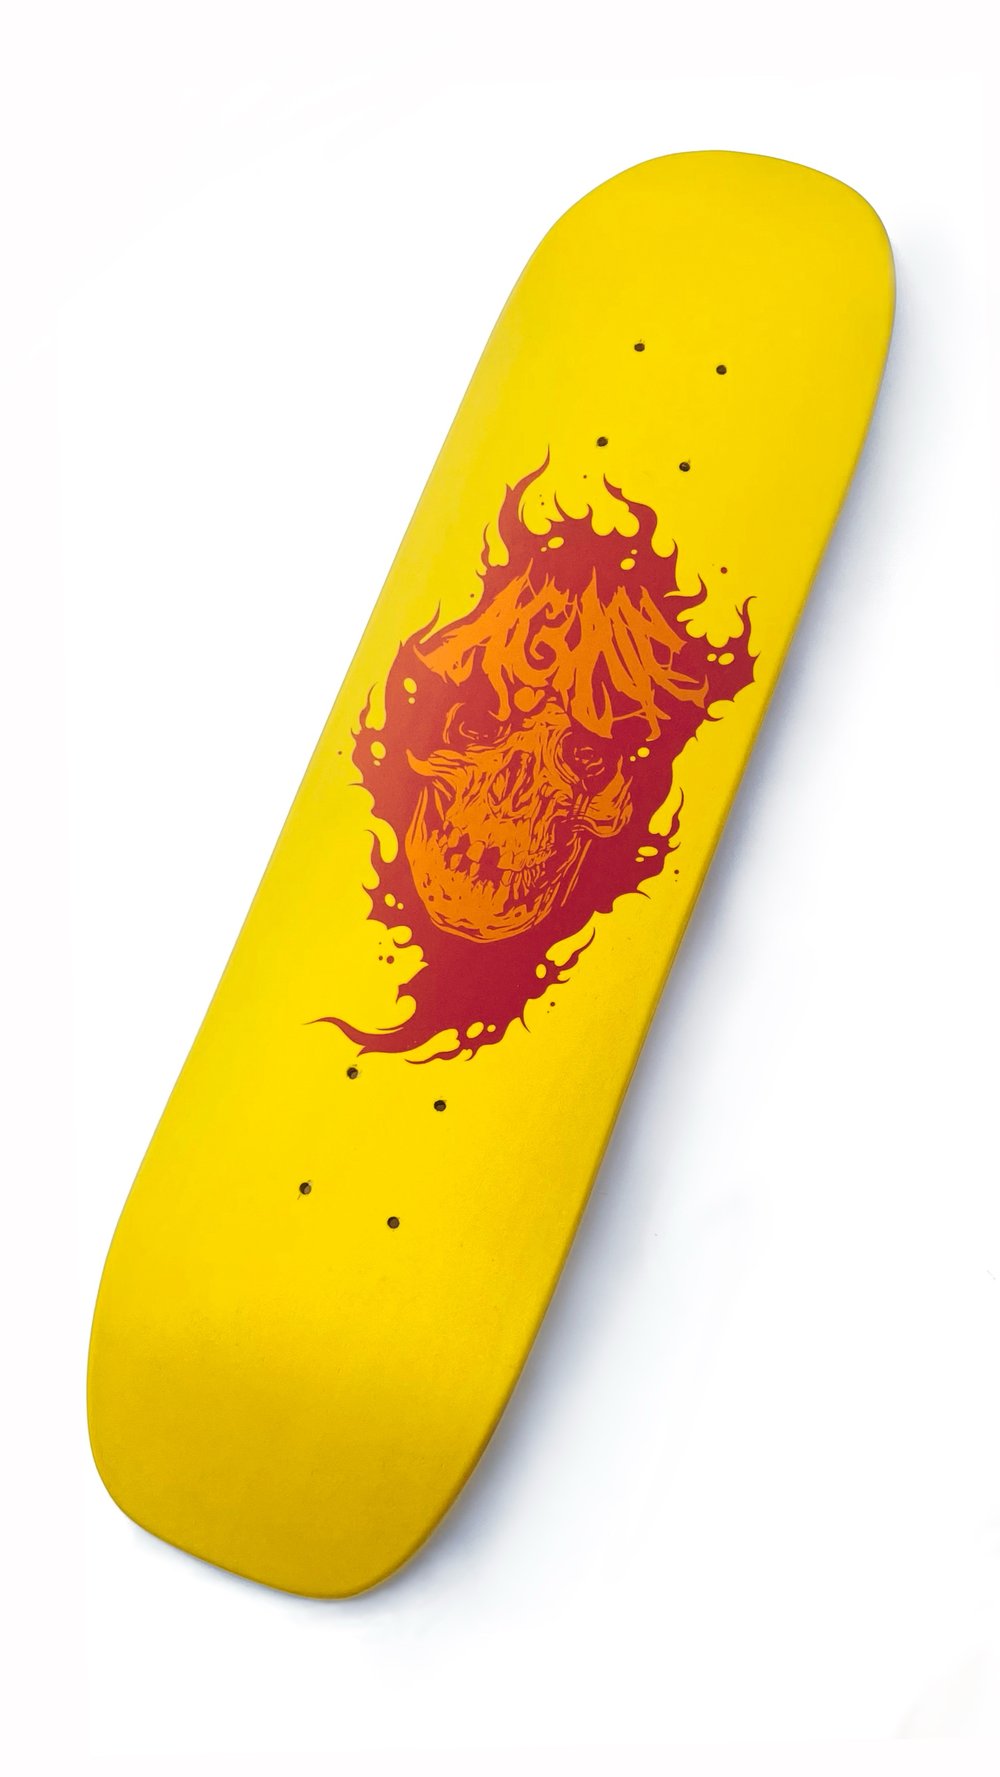 FREESTYLE SKATEBOARD "UNDEFINED REASON" LIMITED EDITION BUNDLE YELLOW 7.5